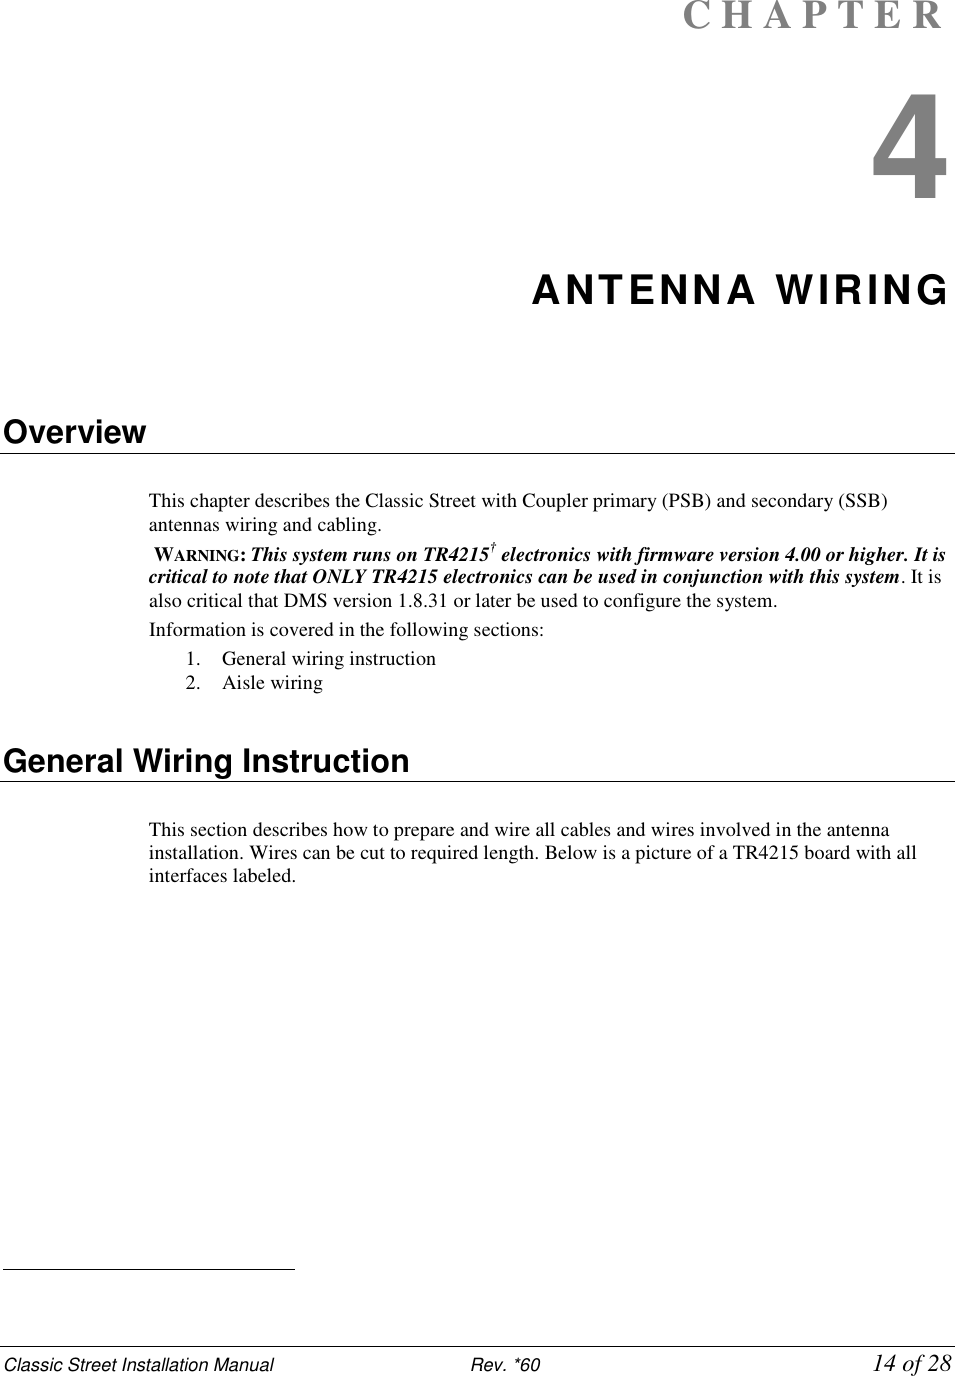 Classic Street Installation Manual                           Rev. *60             14 of 28 C H A P T E R  4 ANTENNA WIRING    Overview  This chapter describes the Classic Street with Coupler primary (PSB) and secondary (SSB) antennas wiring and cabling.  WARNING: This system runs on TR4215† electronics with firmware version 4.00 or higher. It is critical to note that ONLY TR4215 electronics can be used in conjunction with this system. It is also critical that DMS version 1.8.31 or later be used to configure the system. Information is covered in the following sections: 1. General wiring instruction 2. Aisle wiring    General Wiring Instruction  This section describes how to prepare and wire all cables and wires involved in the antenna installation. Wires can be cut to required length. Below is a picture of a TR4215 board with all interfaces labeled.                                                   